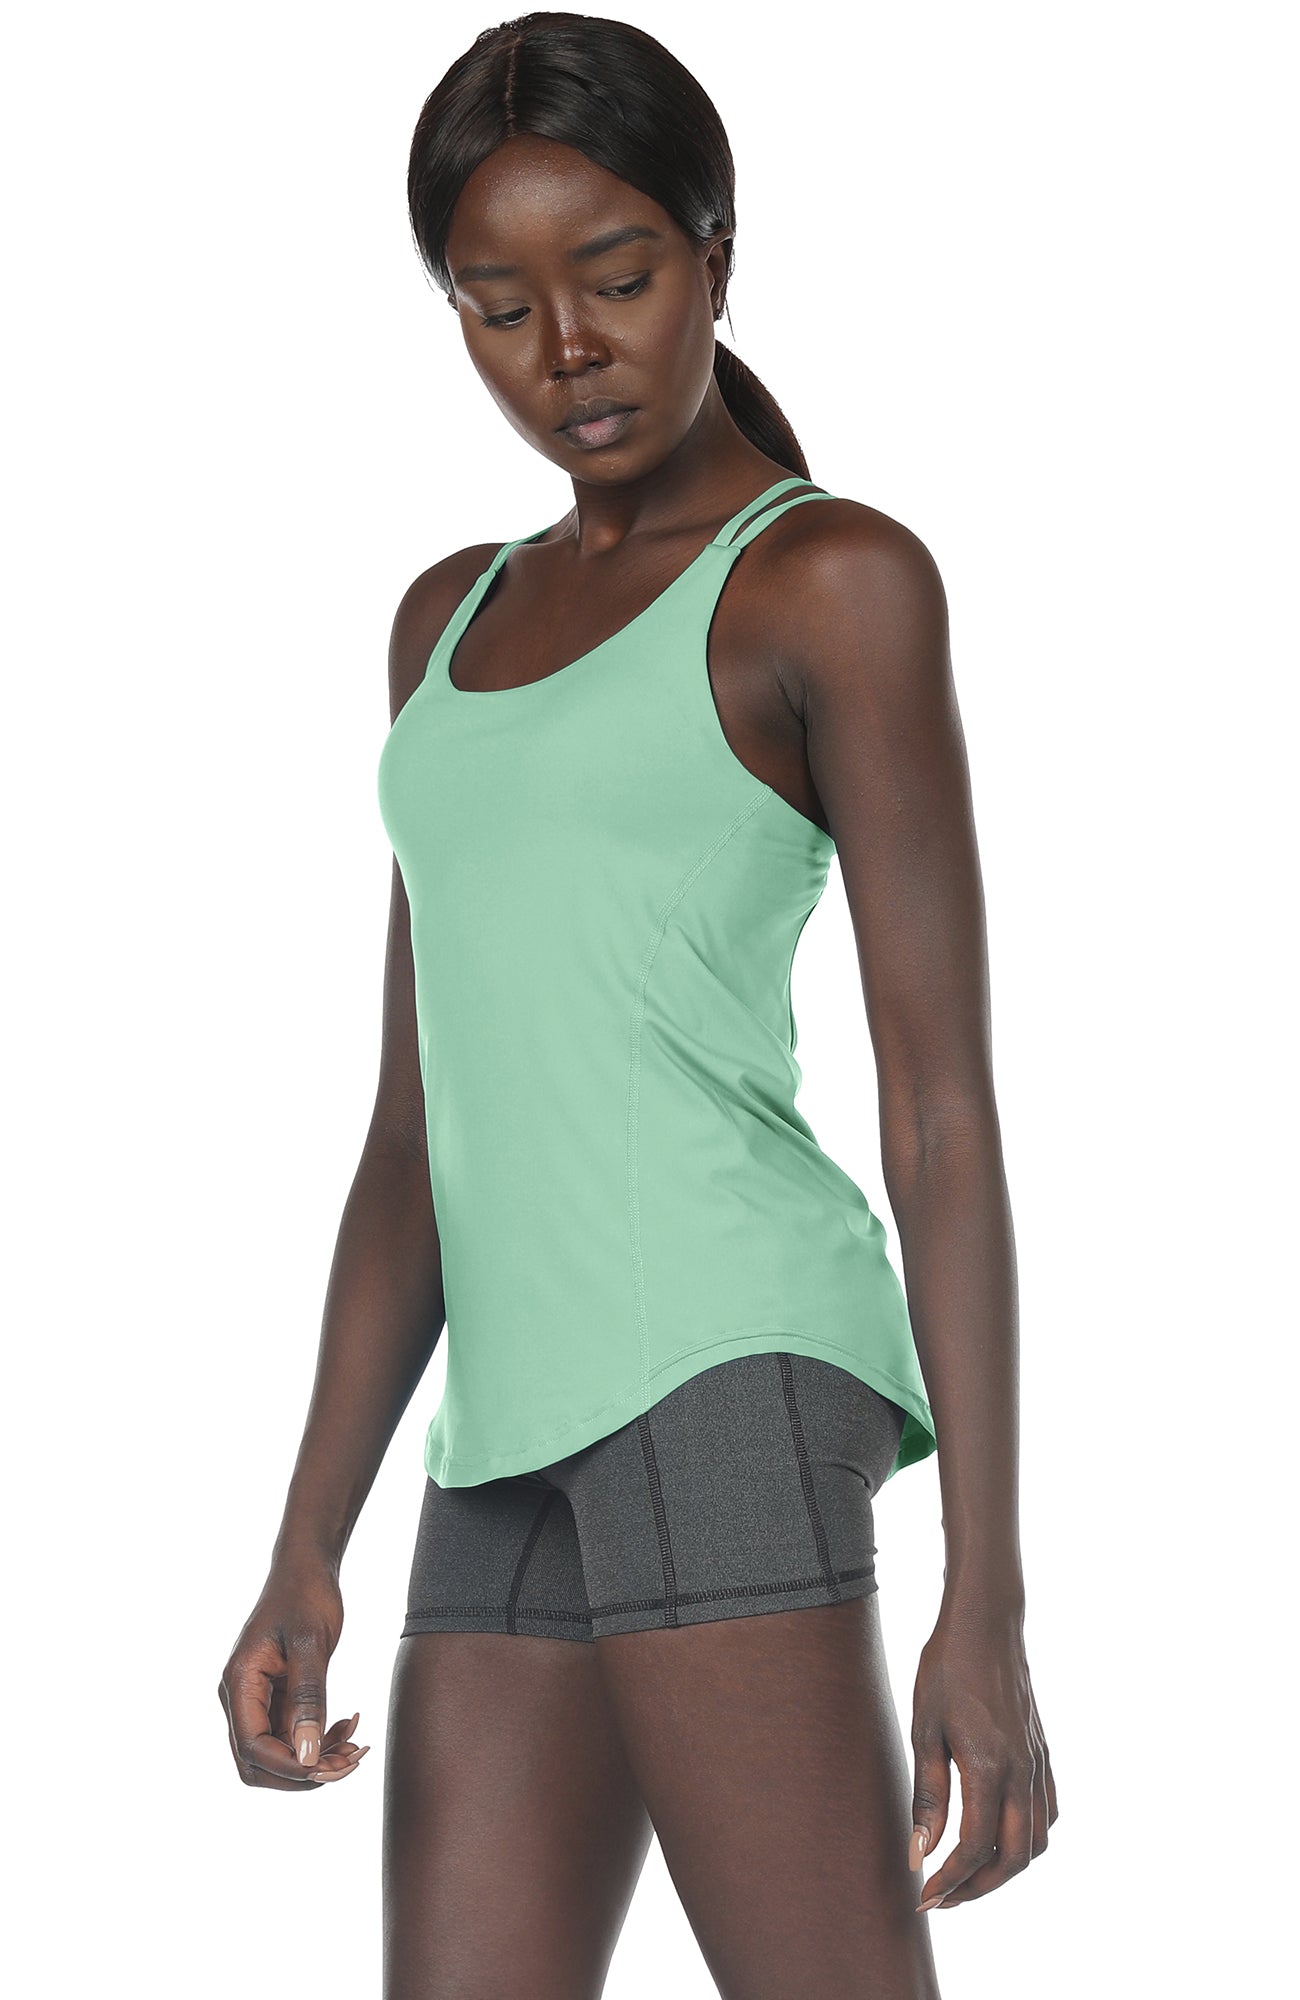  icyzone Workout Tank Tops with Built in Bra - Women's